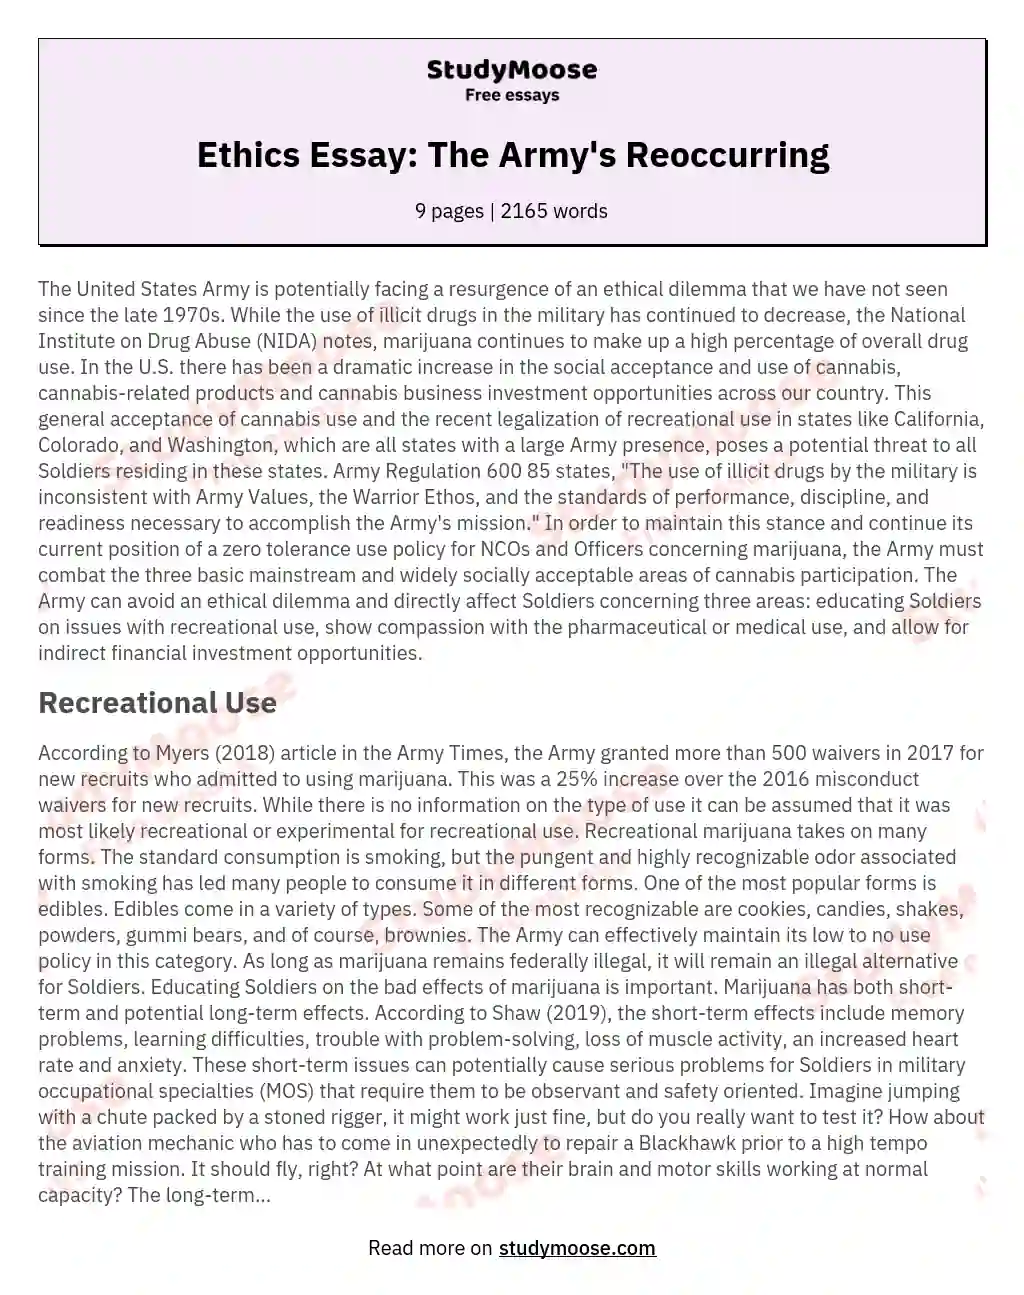 Ethics Essay: The Army's Reoccurring essay